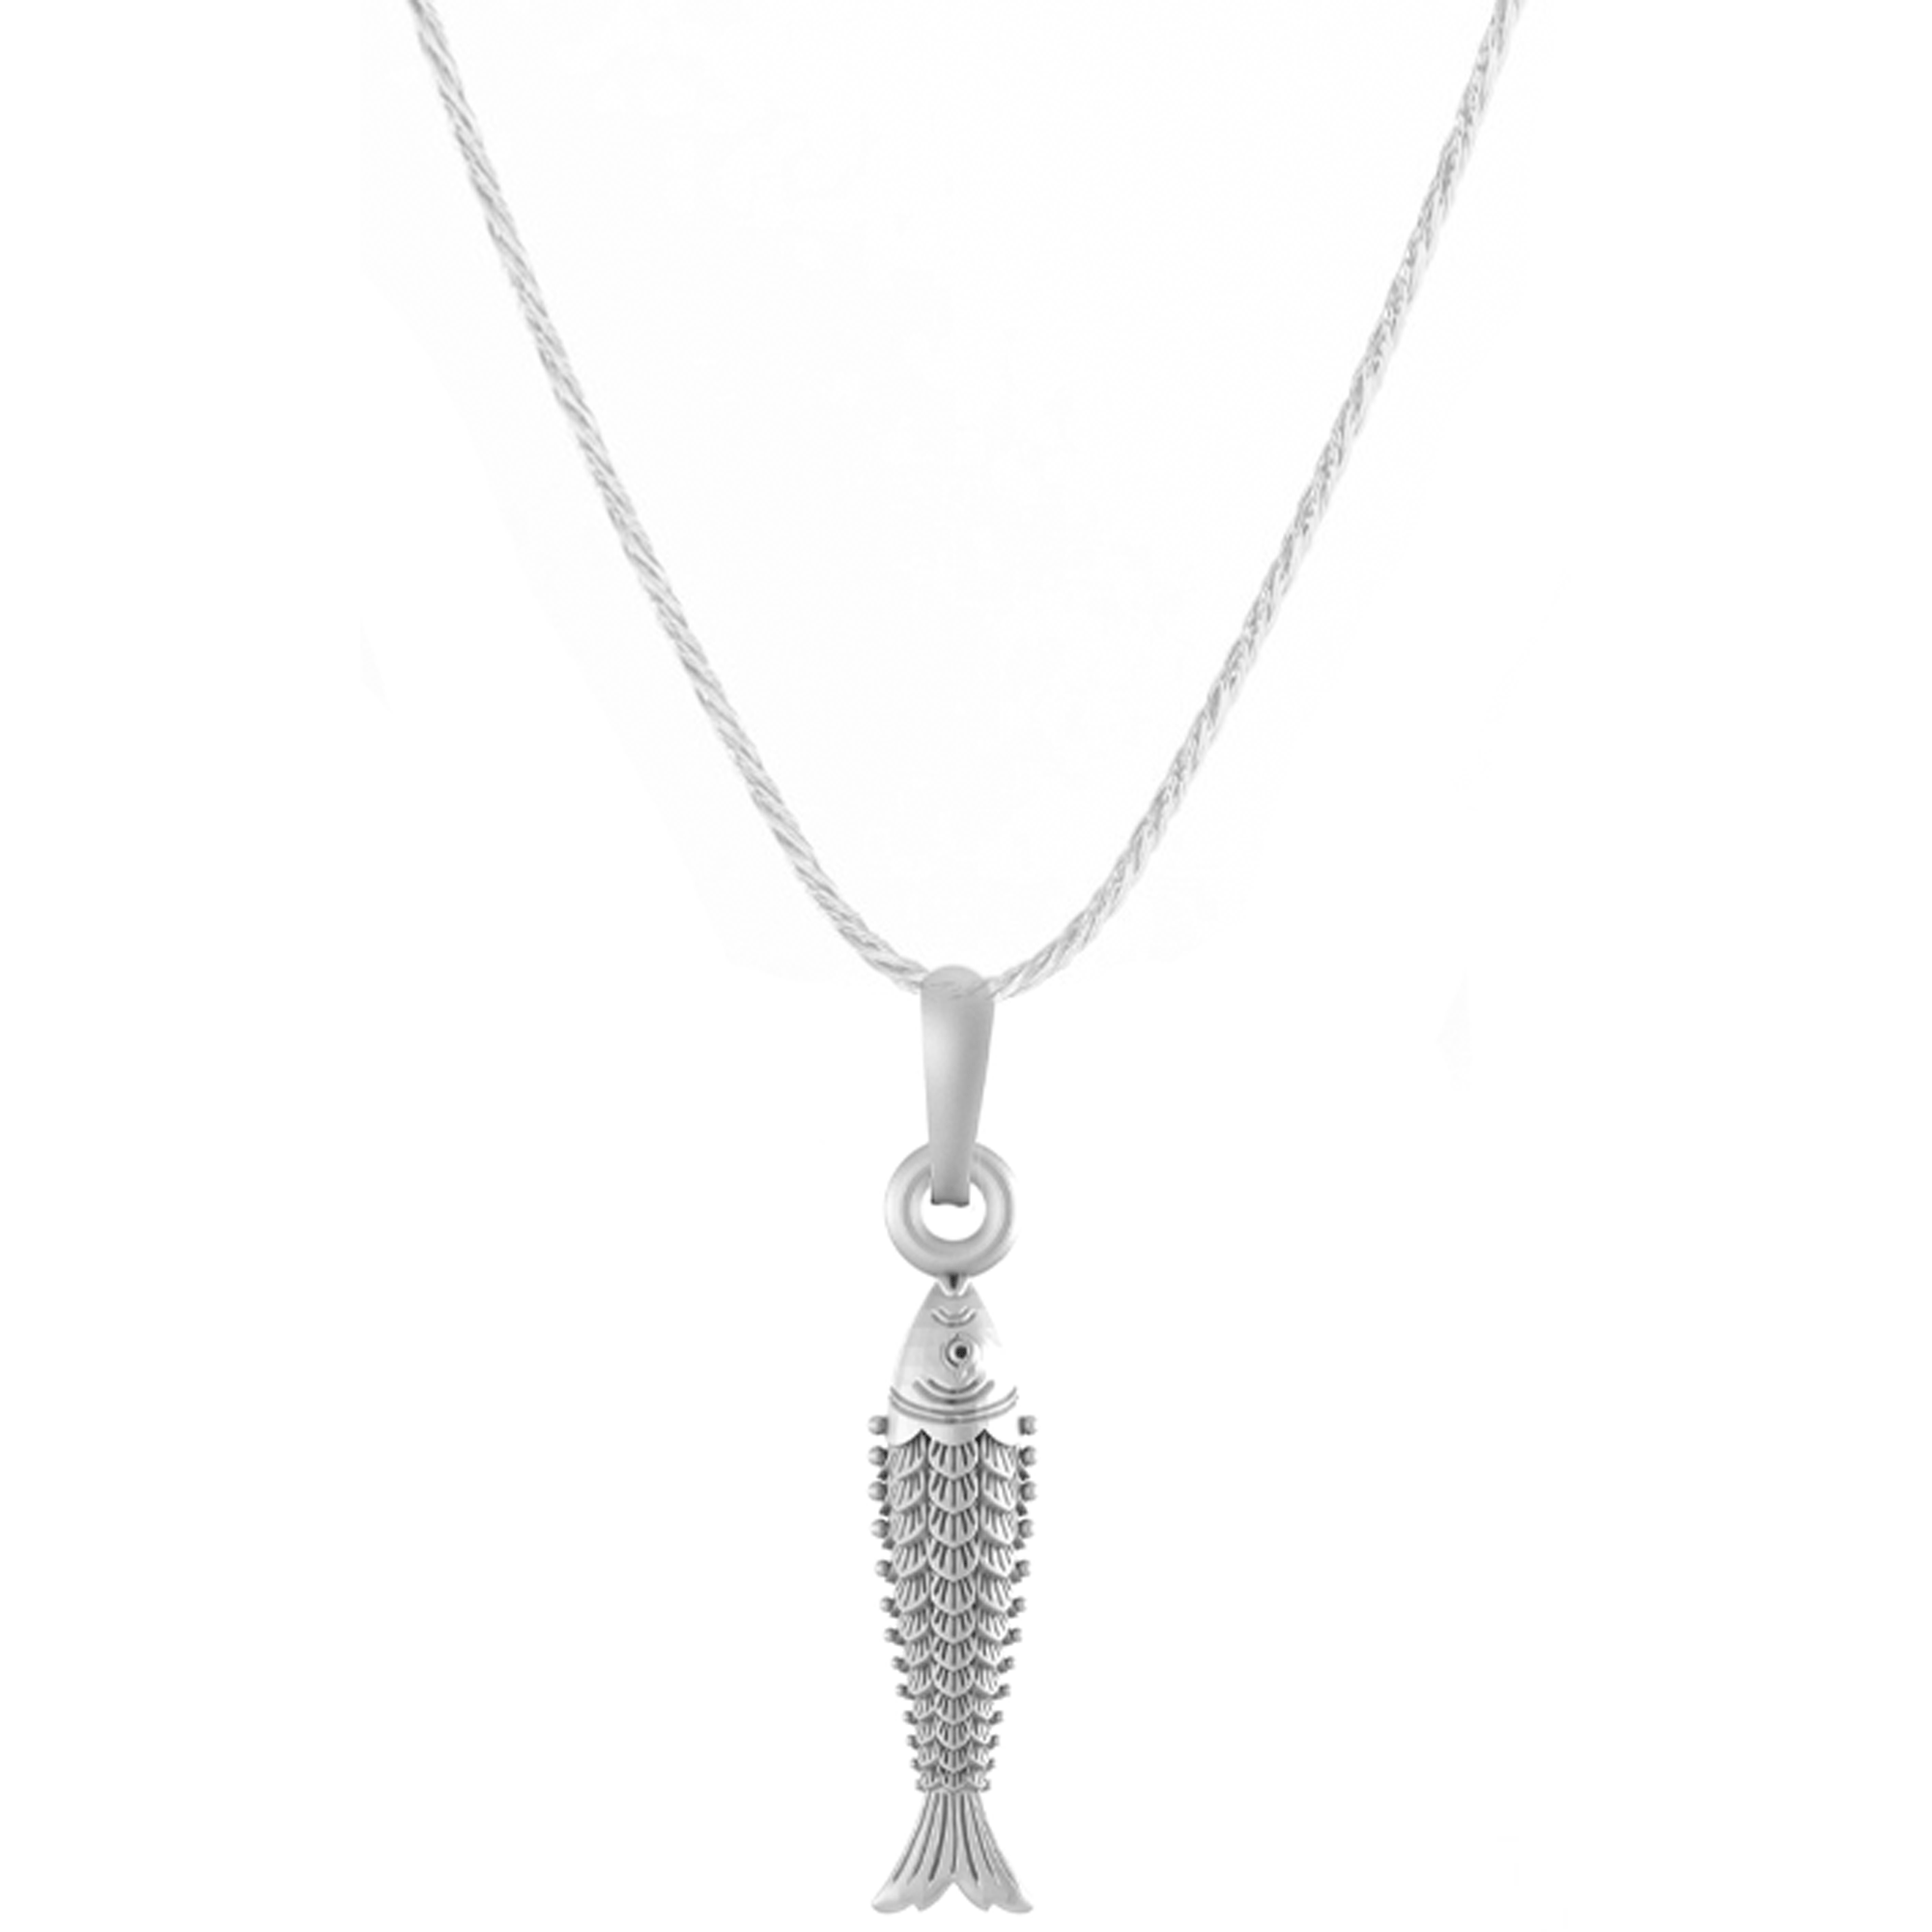 Akshat Sapphire Sterling Silver (92.5% purity) Stylish and Fashionable Fish Chain Pendant  (Pendant with Rope Chain) for Men & Women Pure Silver Fish Chain Locket for Happiness and joy